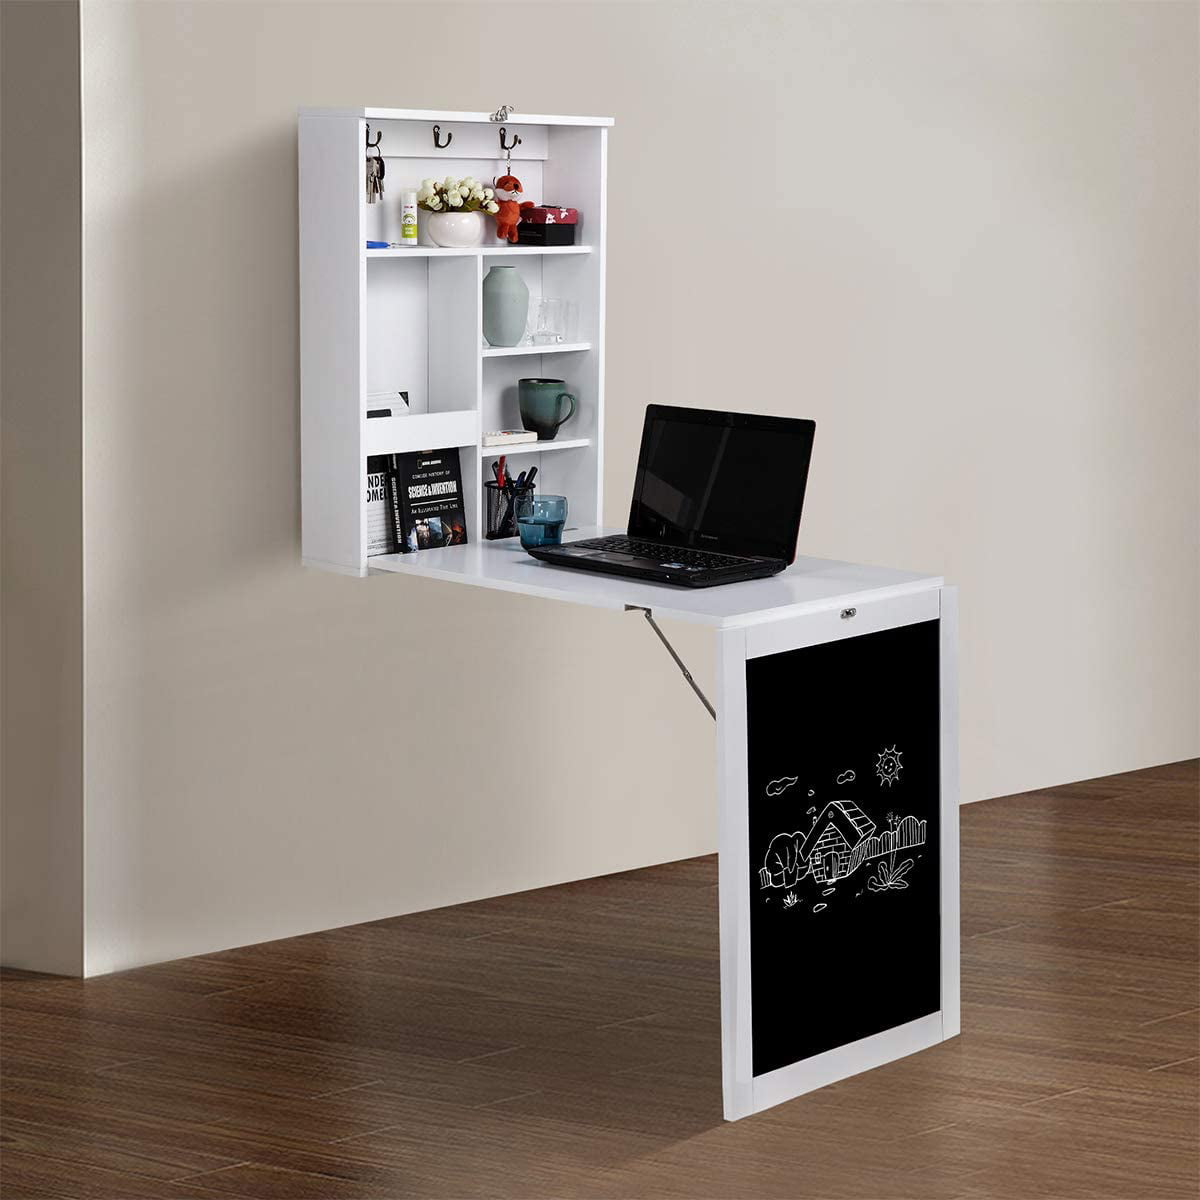 Details about   Wooden Wall-Mounted Space-Saving Desk Fold Out Computer Laptop Desk with Storage 